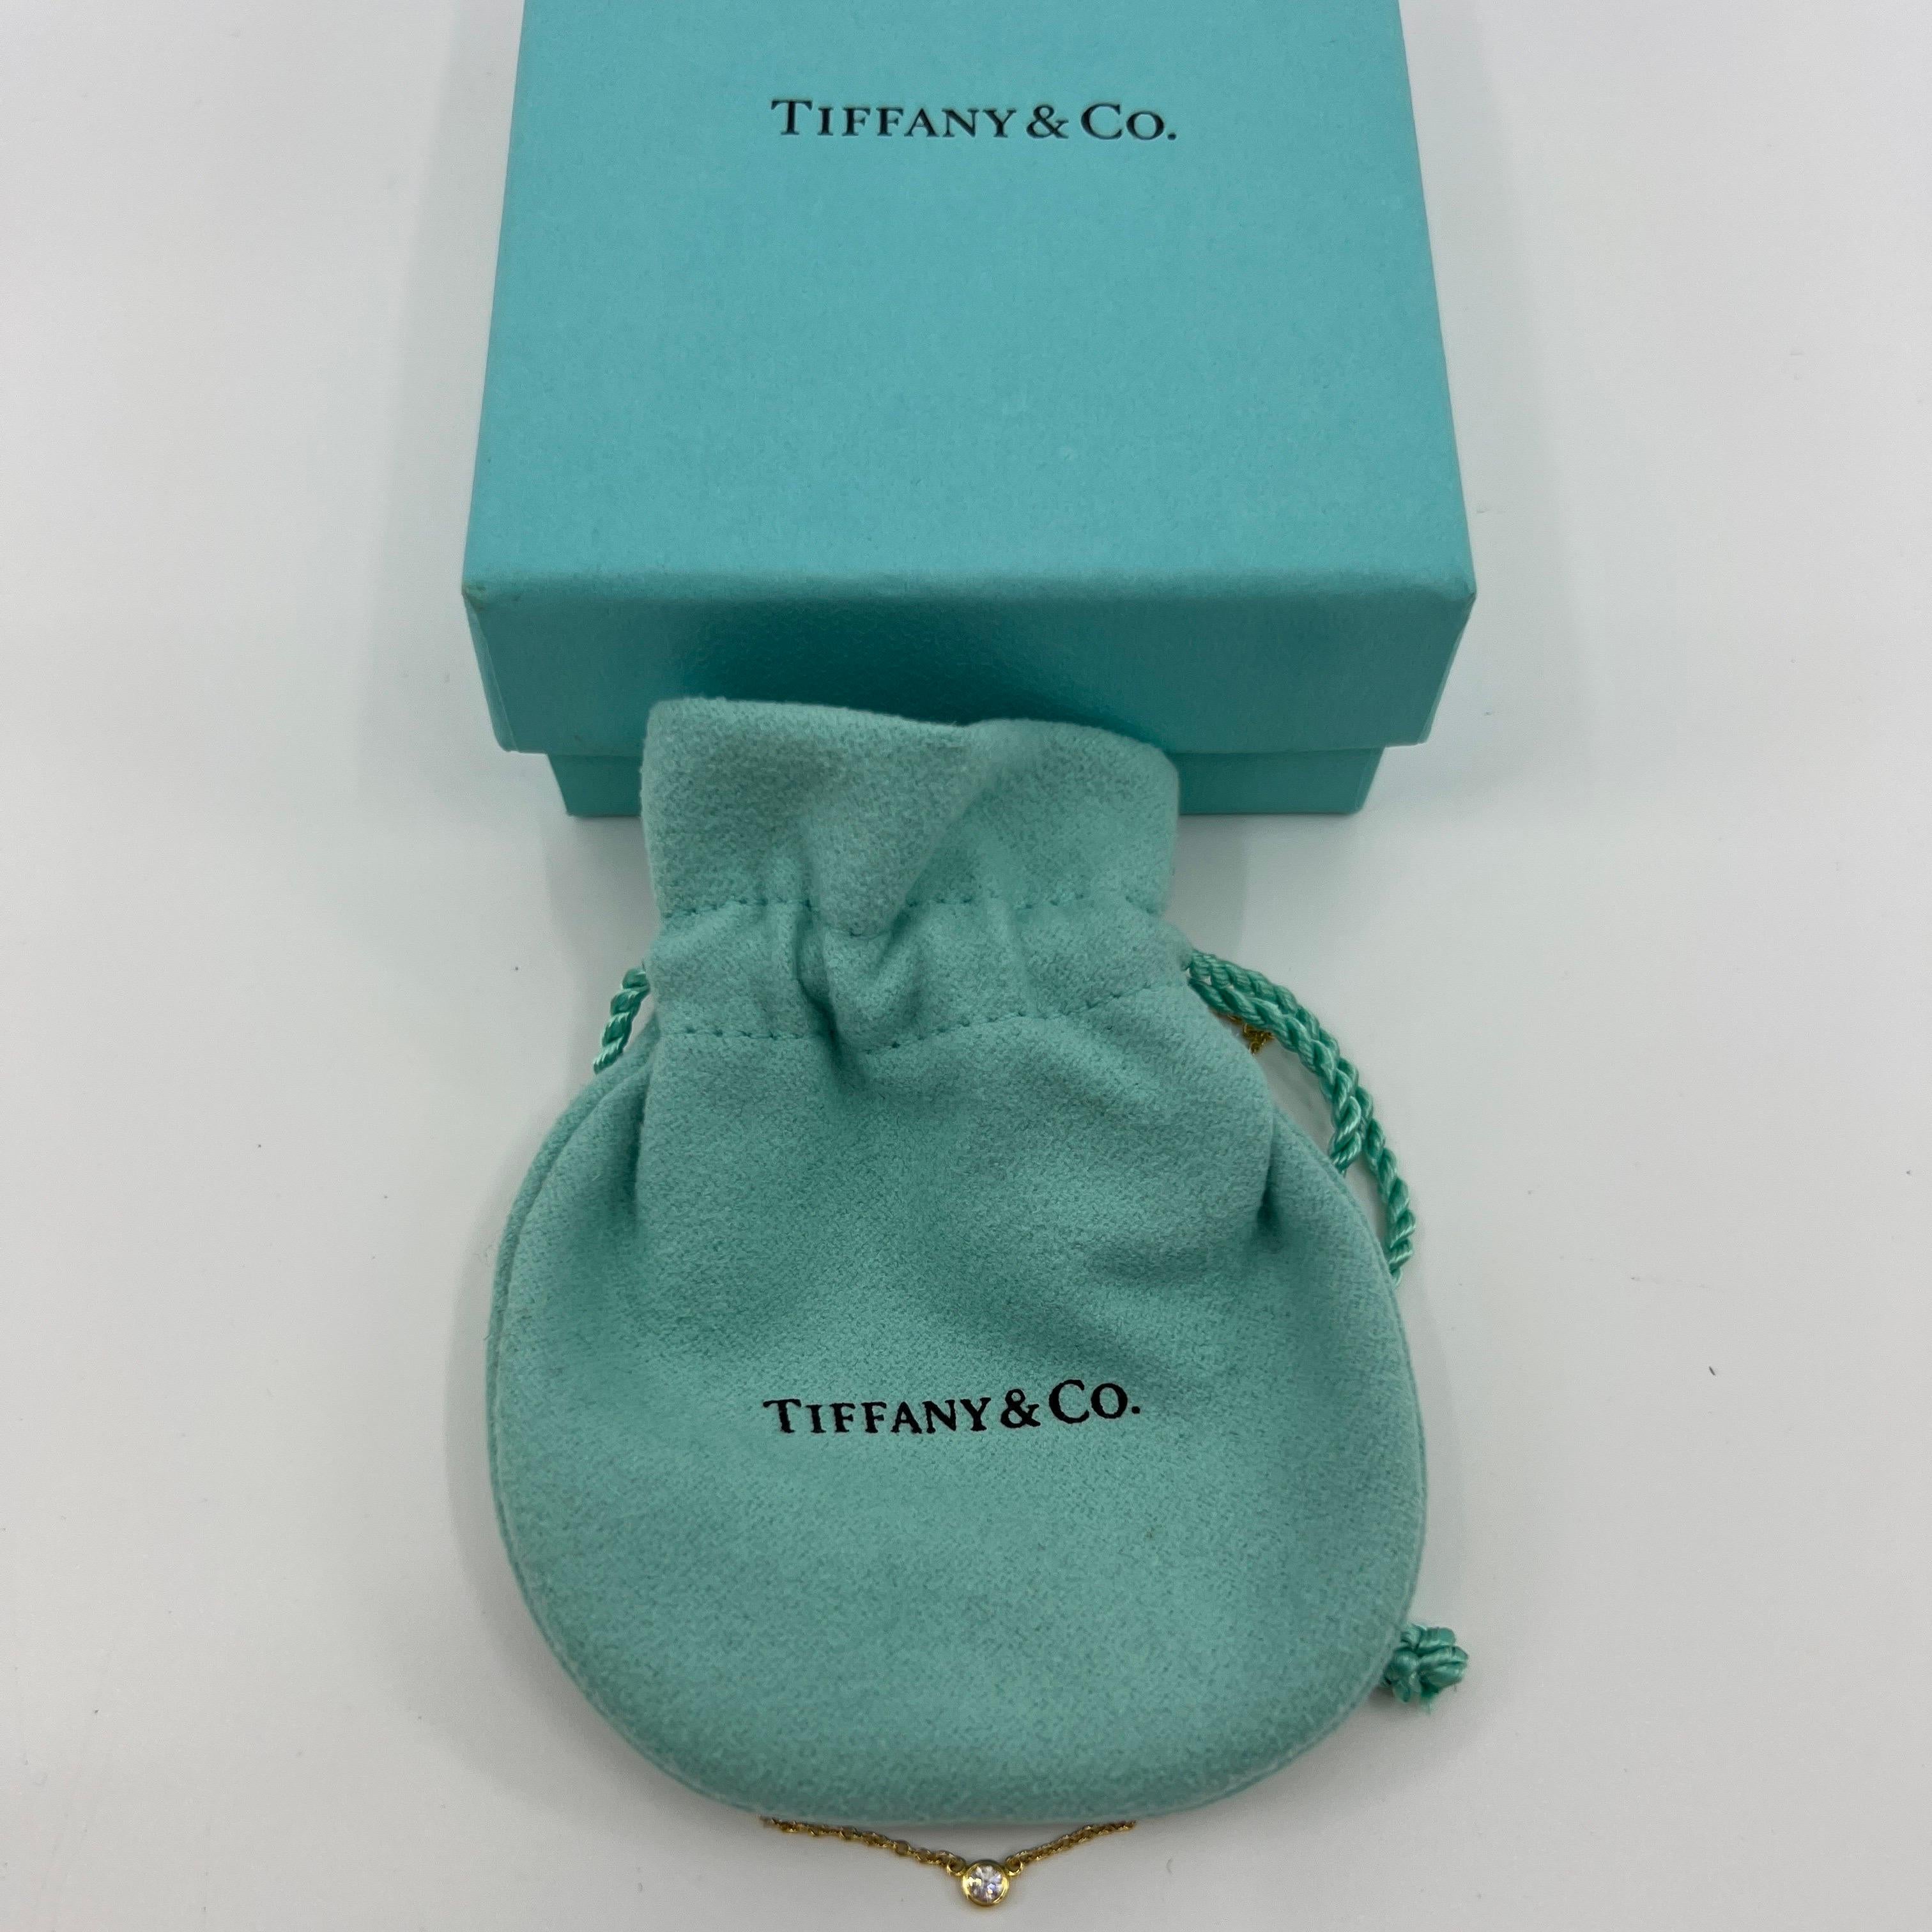 Vintage Tiffany & Co. Elsa Peretti By The Yard Round Diamond 18k Yellow Gold Necklace.

A beautiful 18k yellow gold pendant necklace set with a stunning round white diamond measuring 3.3mm.
A subtle and dainty necklace. Very much in trend right